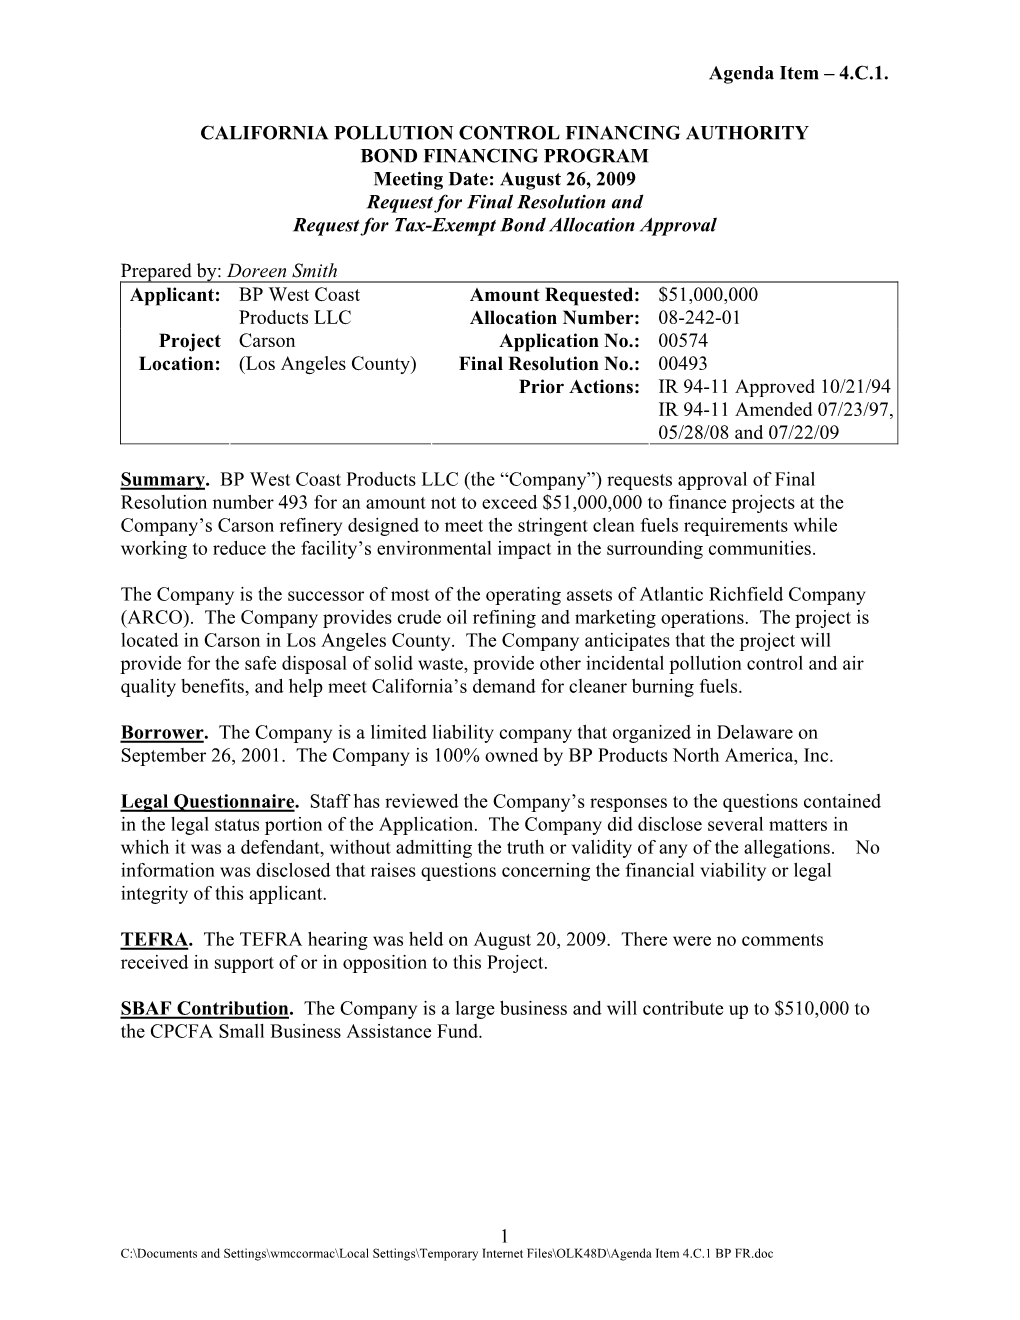 Request for Final Resolution and Request for Tax-Exempt Bond Allocation Approval